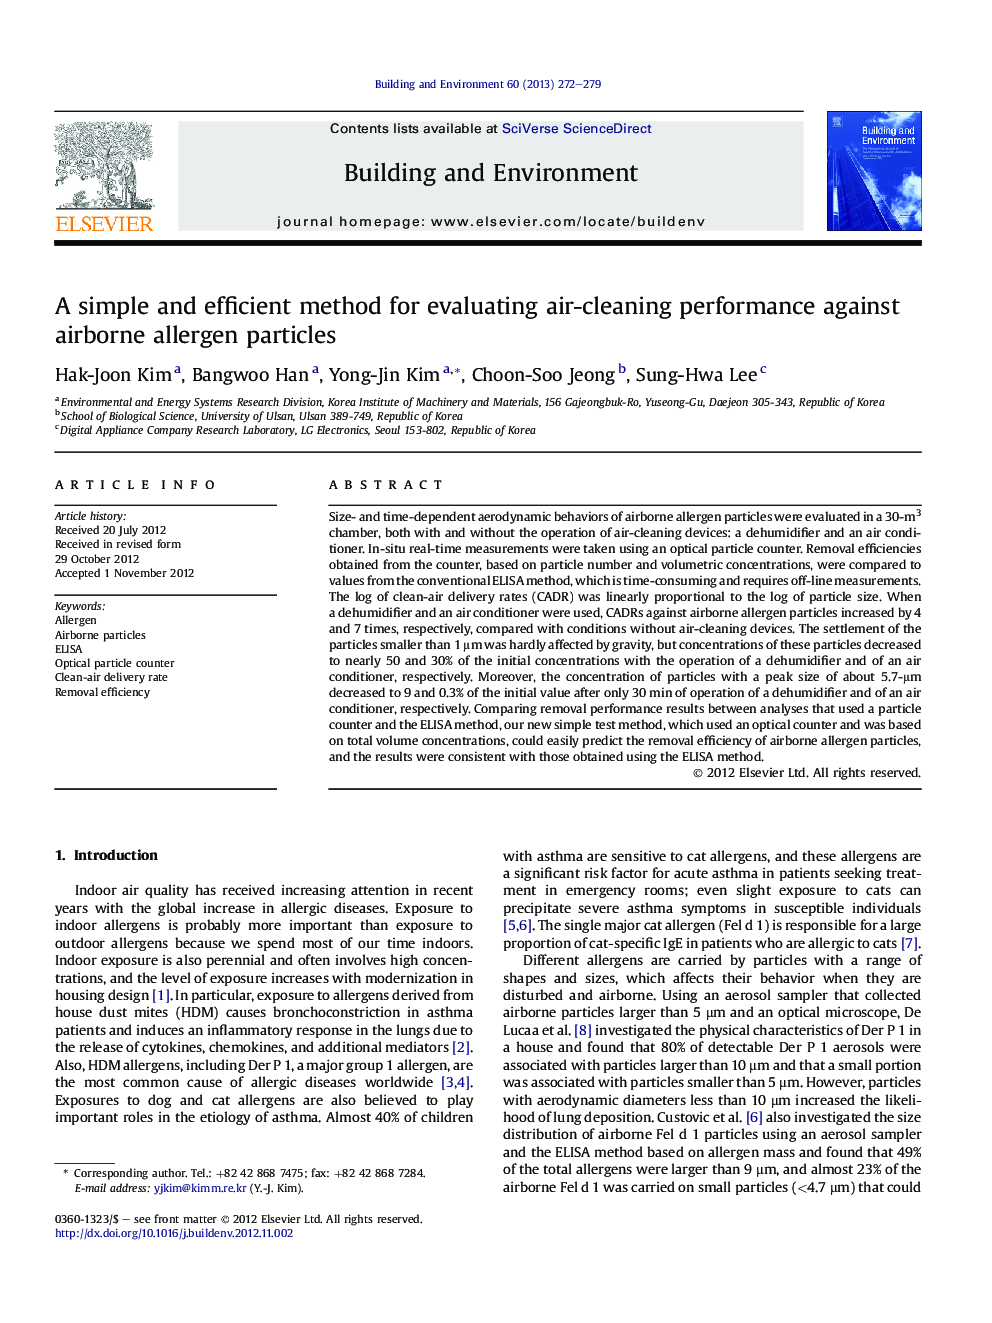 A simple and efficient method for evaluating air-cleaning performance against airborne allergen particles